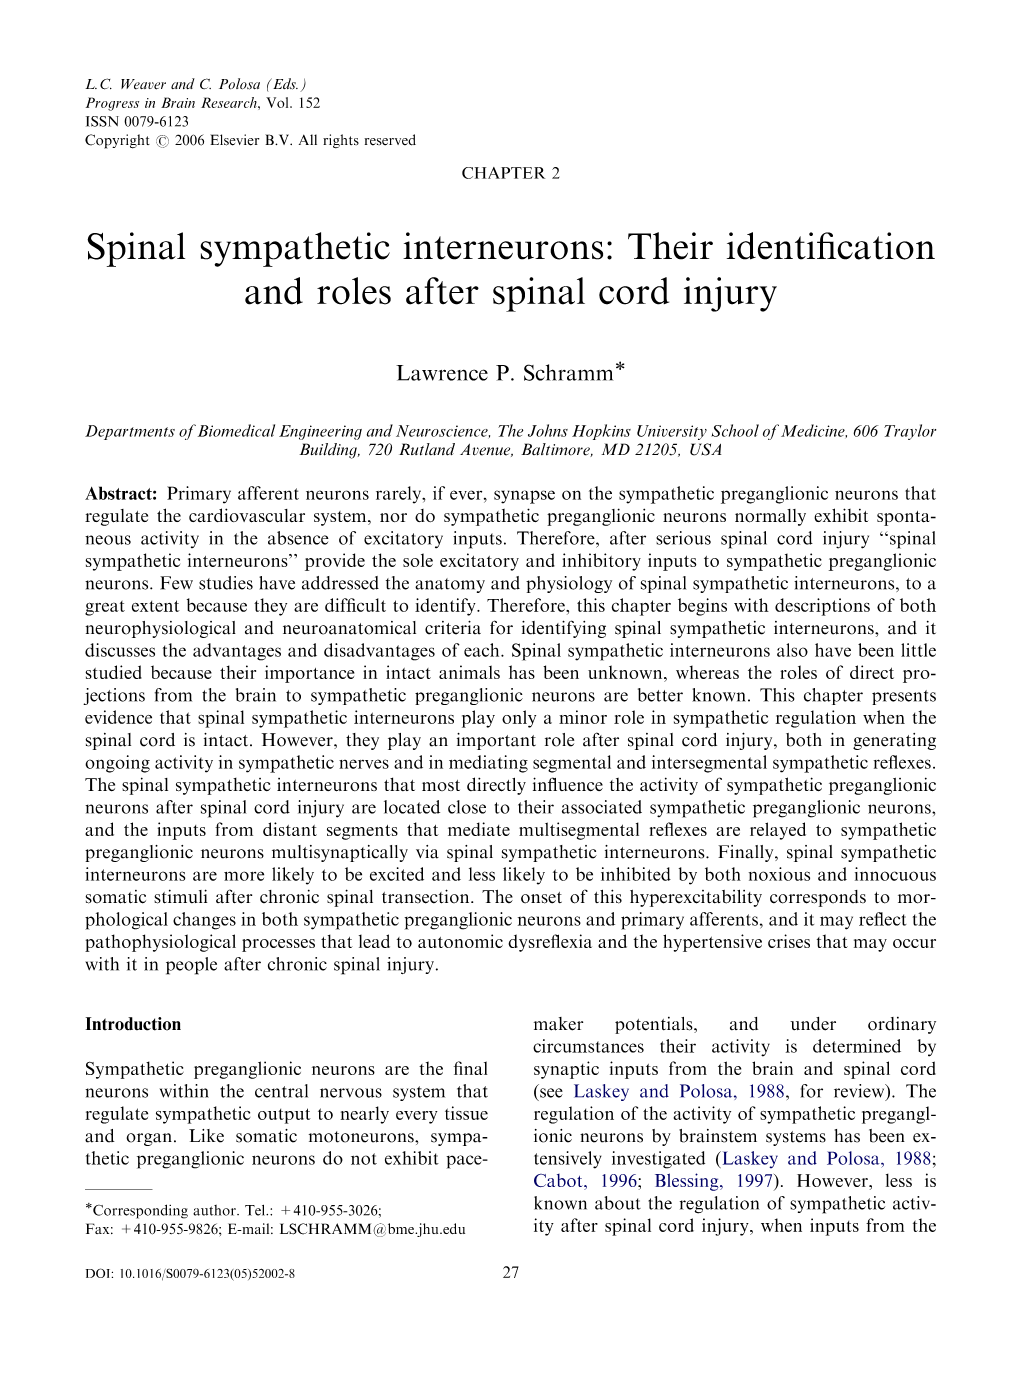 Spinal Sympathetic Interneurons: Their Identification and Roles After Spinal